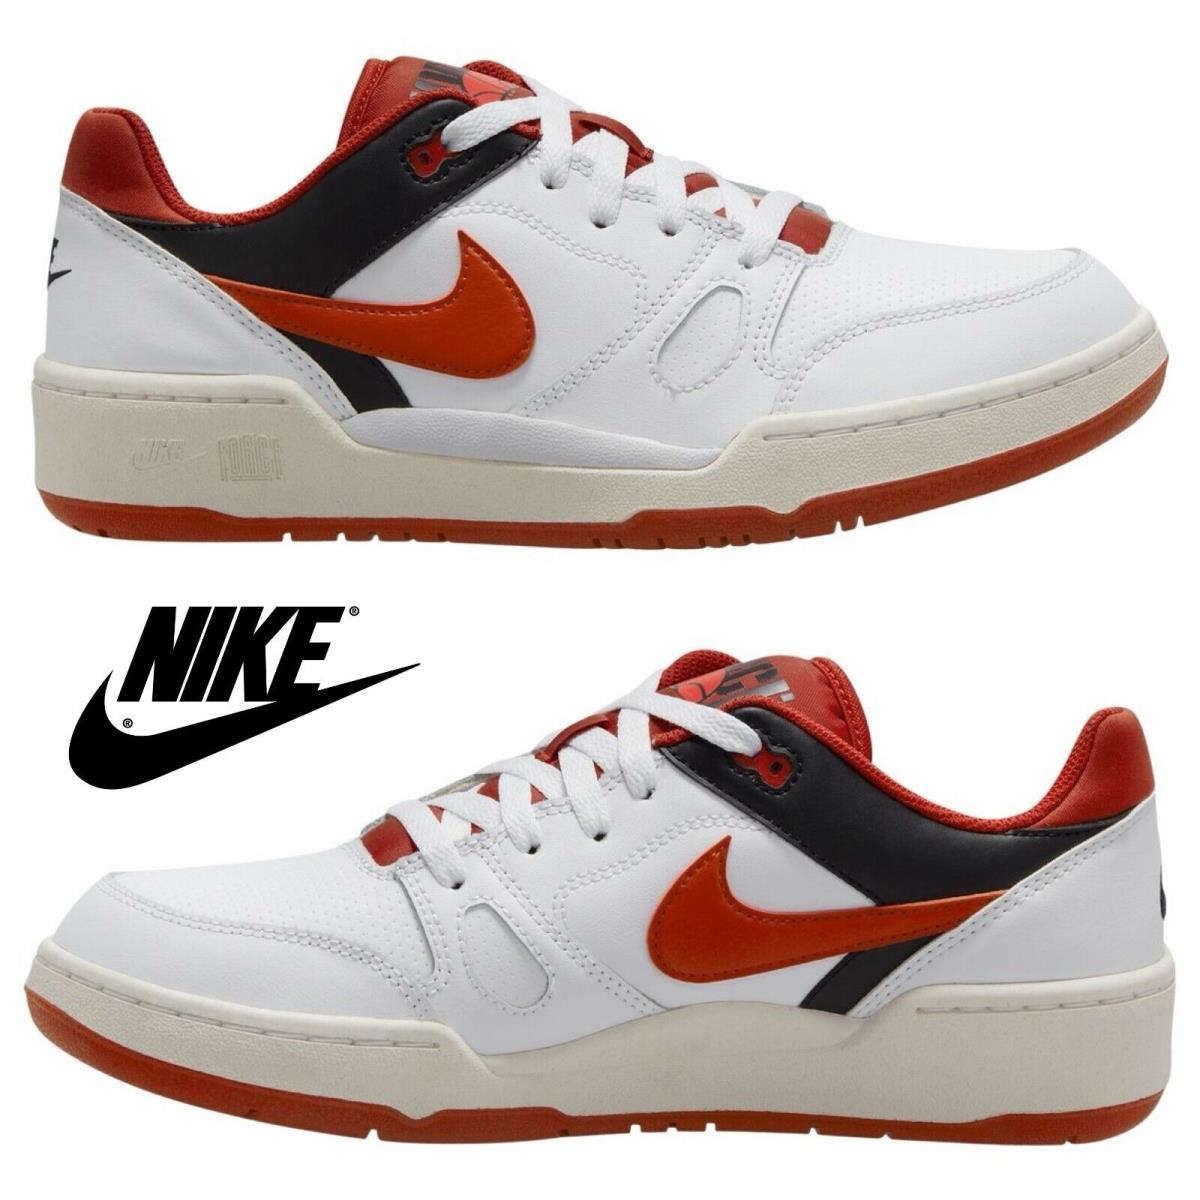 Nike Full Force Low Top Men`s Sneakers Sport Comfort Athletic Shoes White Red